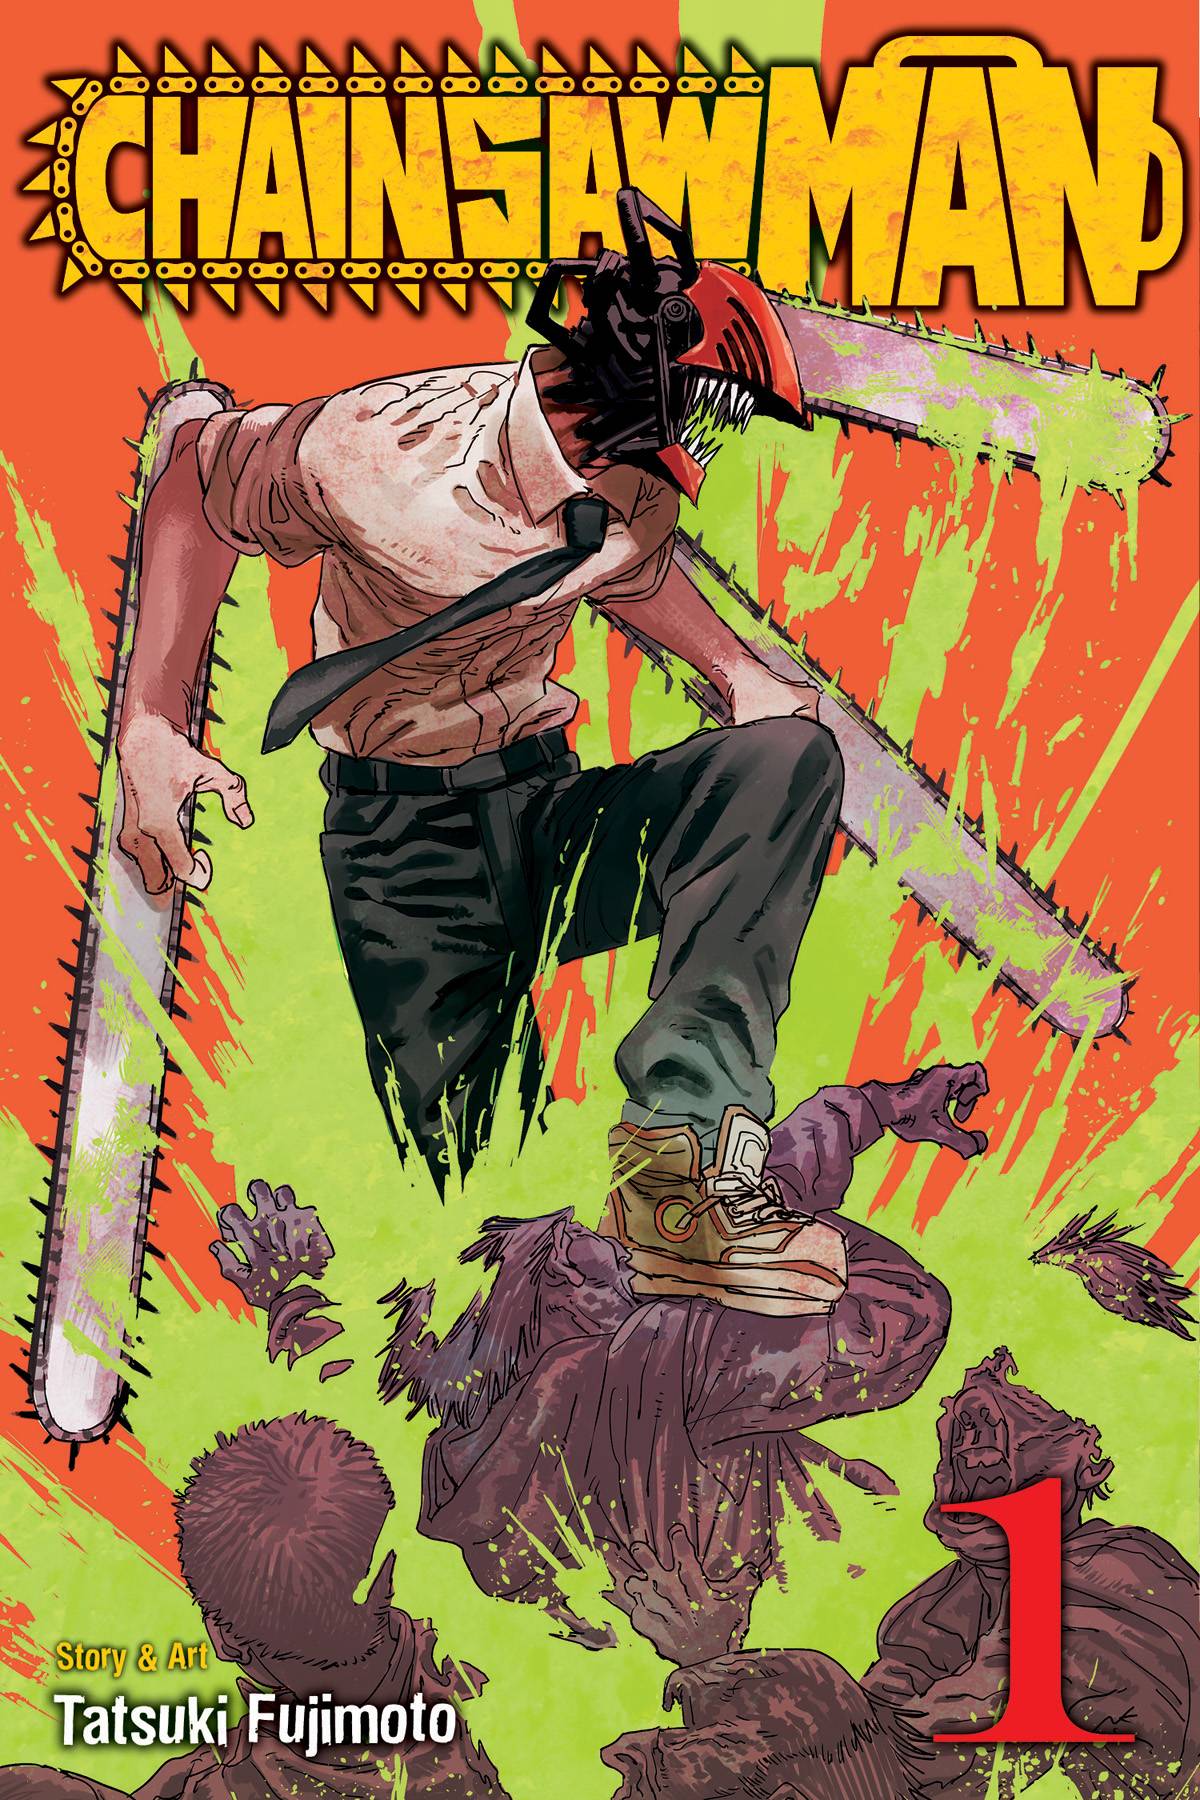 In a splash of bright orange and green, a humanoid with chainsaws for arms and head jumps on top of spattered bodies.